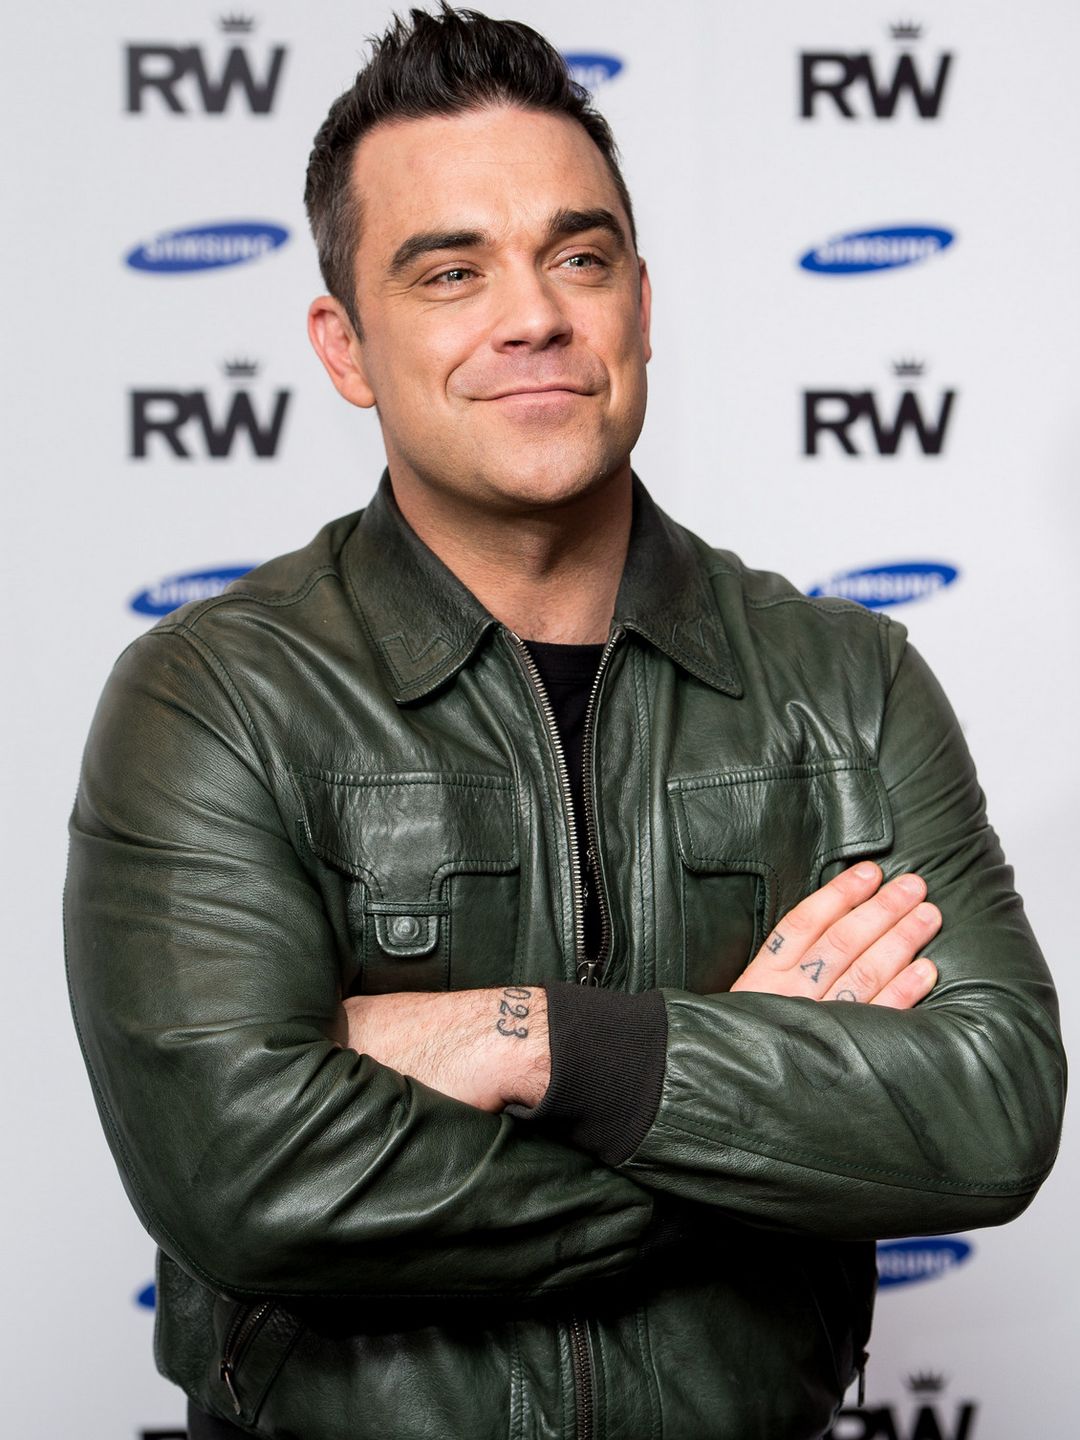 Robbie Williams who is his father